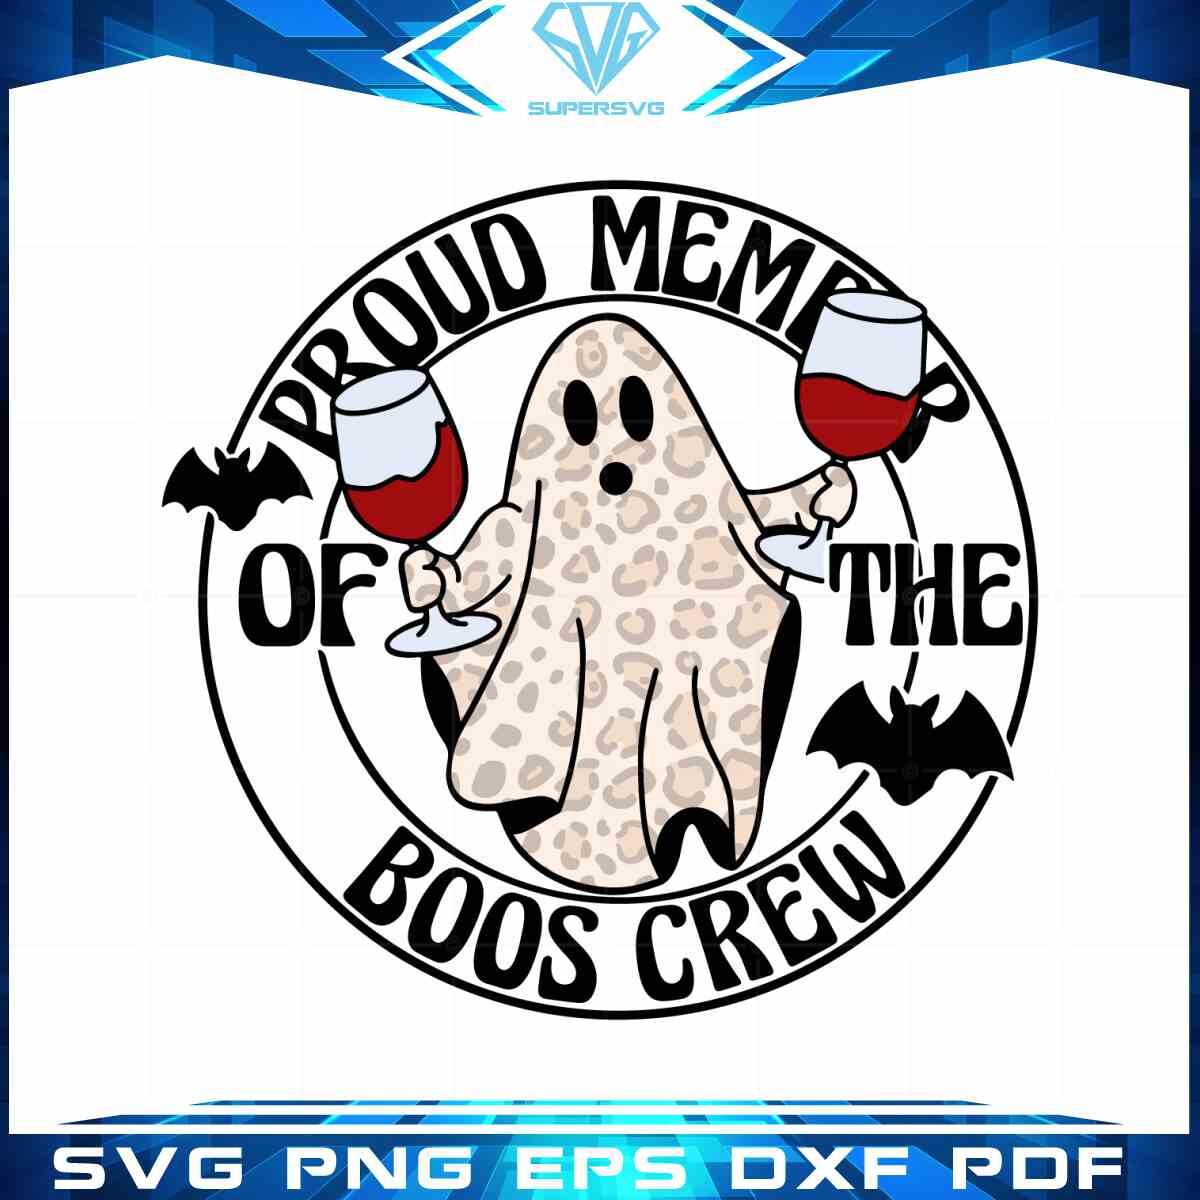 proud-member-of-the-boos-crew-svg-halloween-ghost-cutting-files